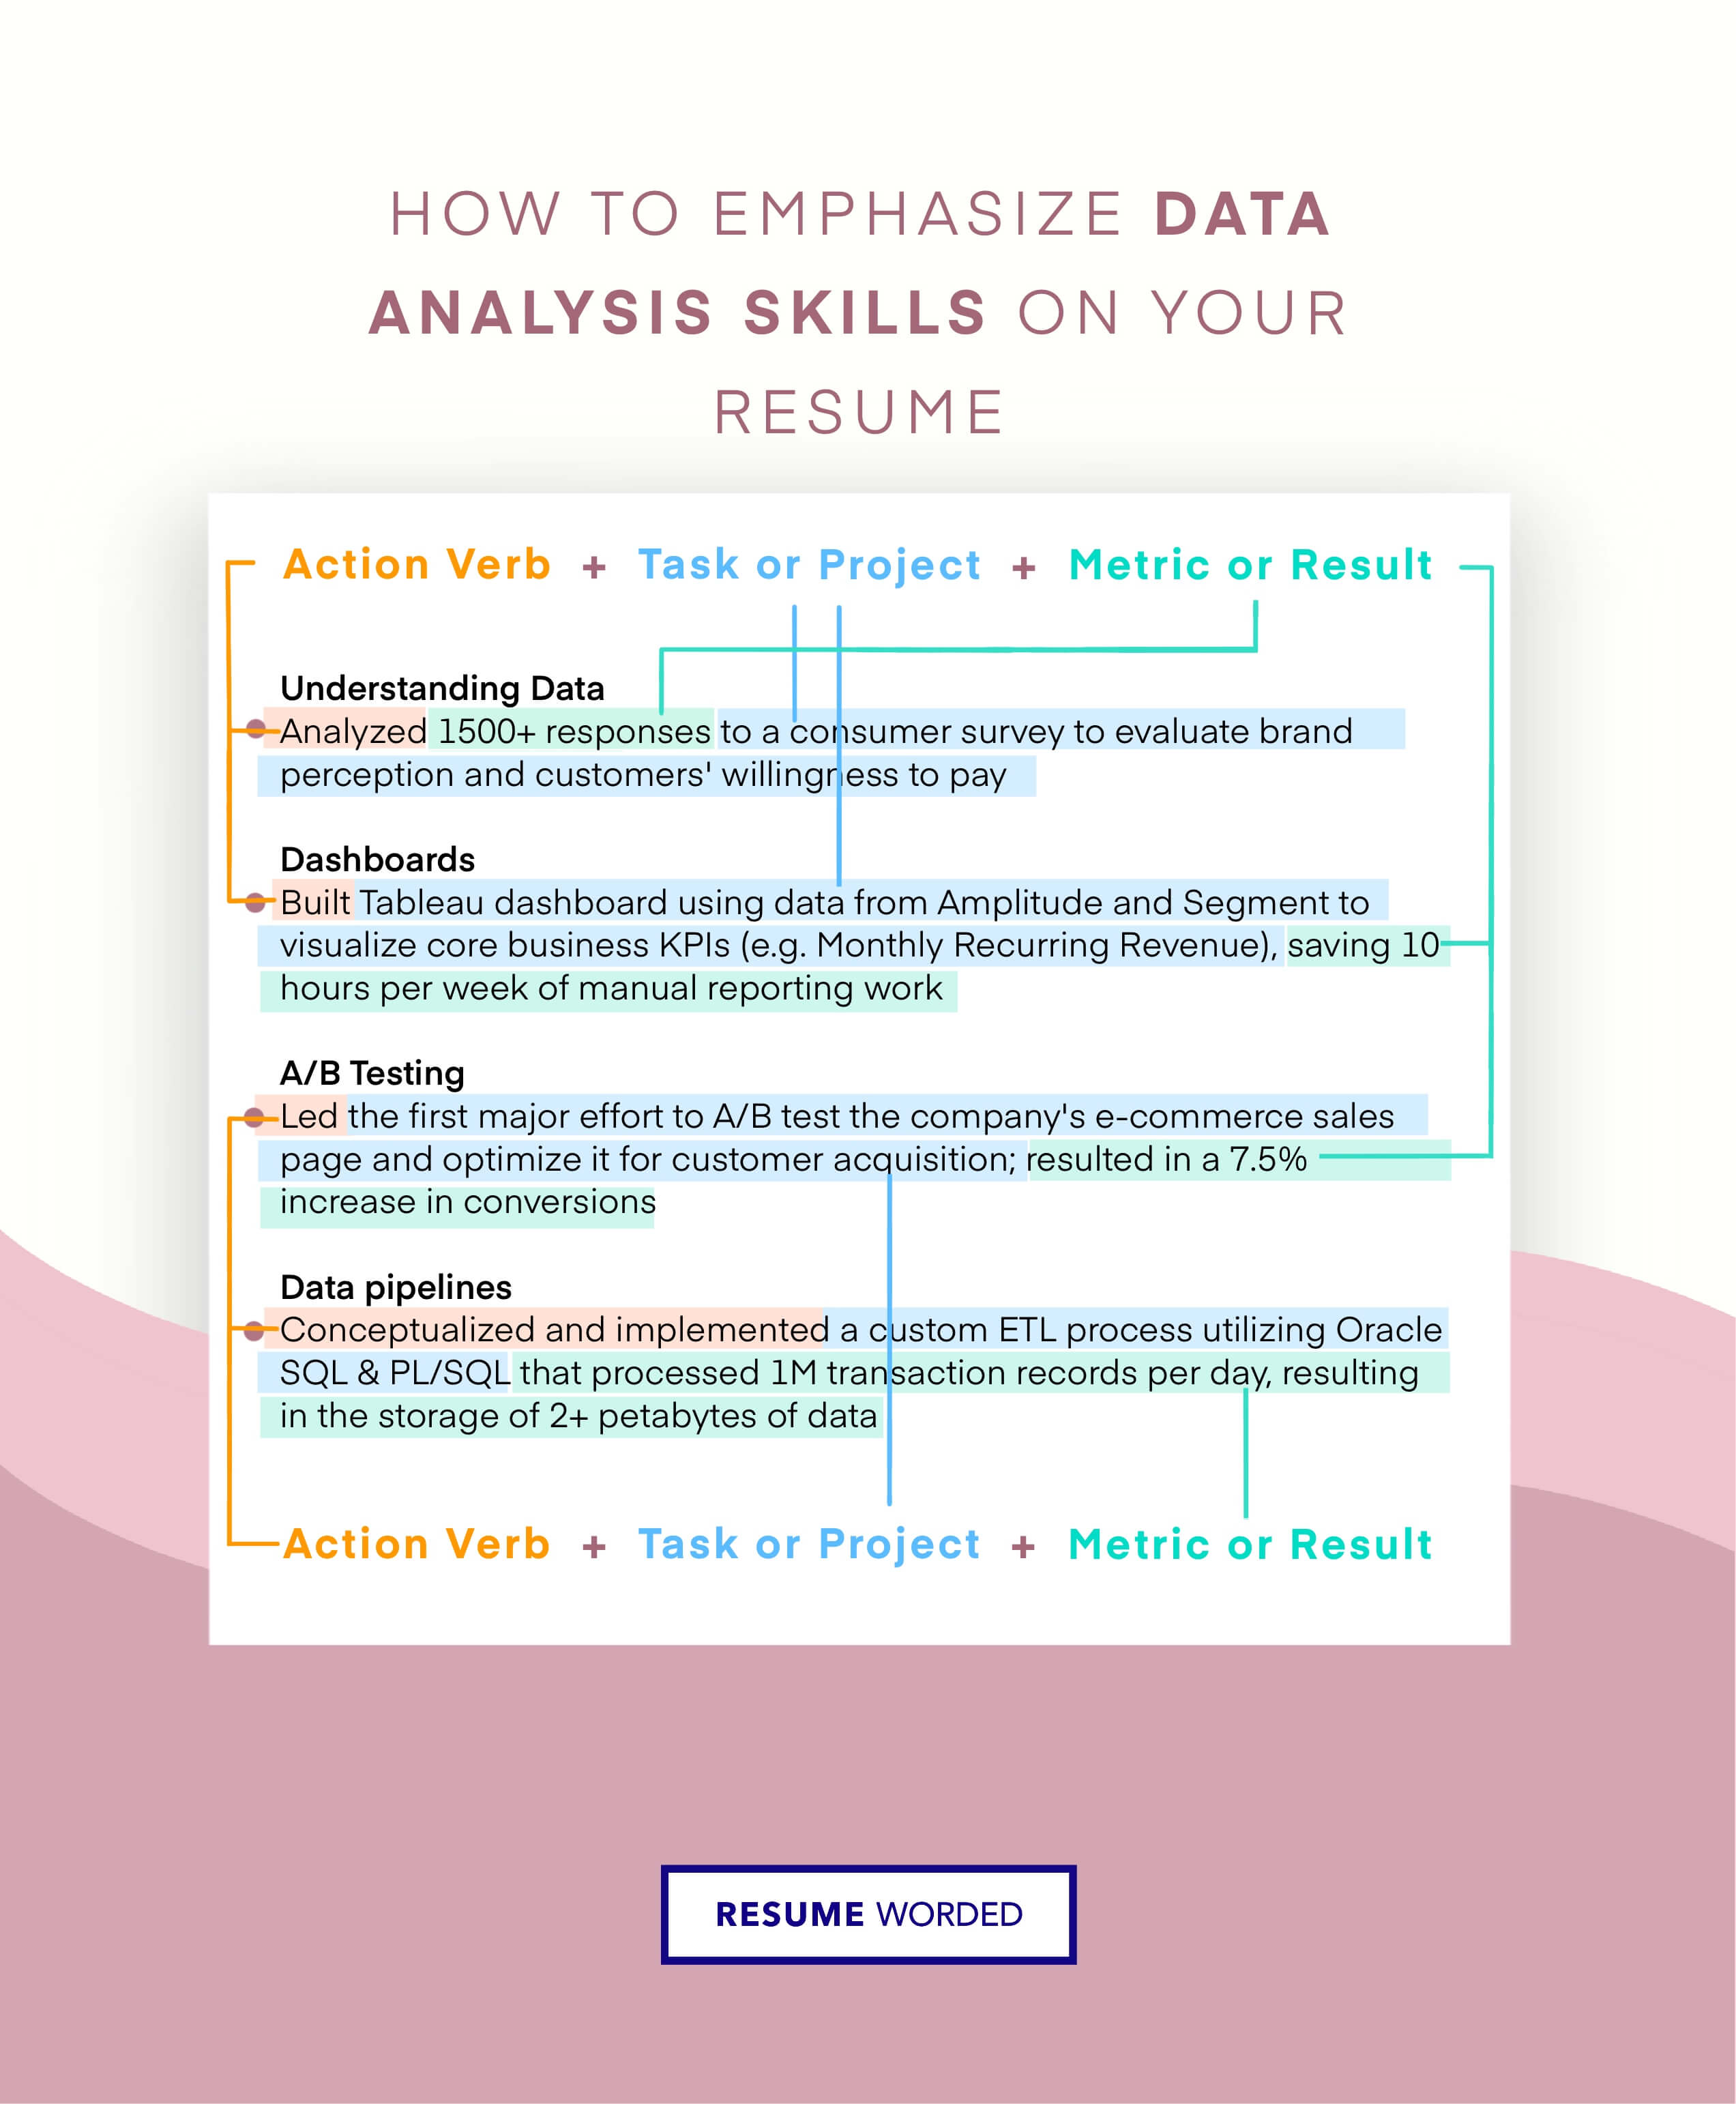 Demonstrate your data analysis skills - Content Marketing Manager CV